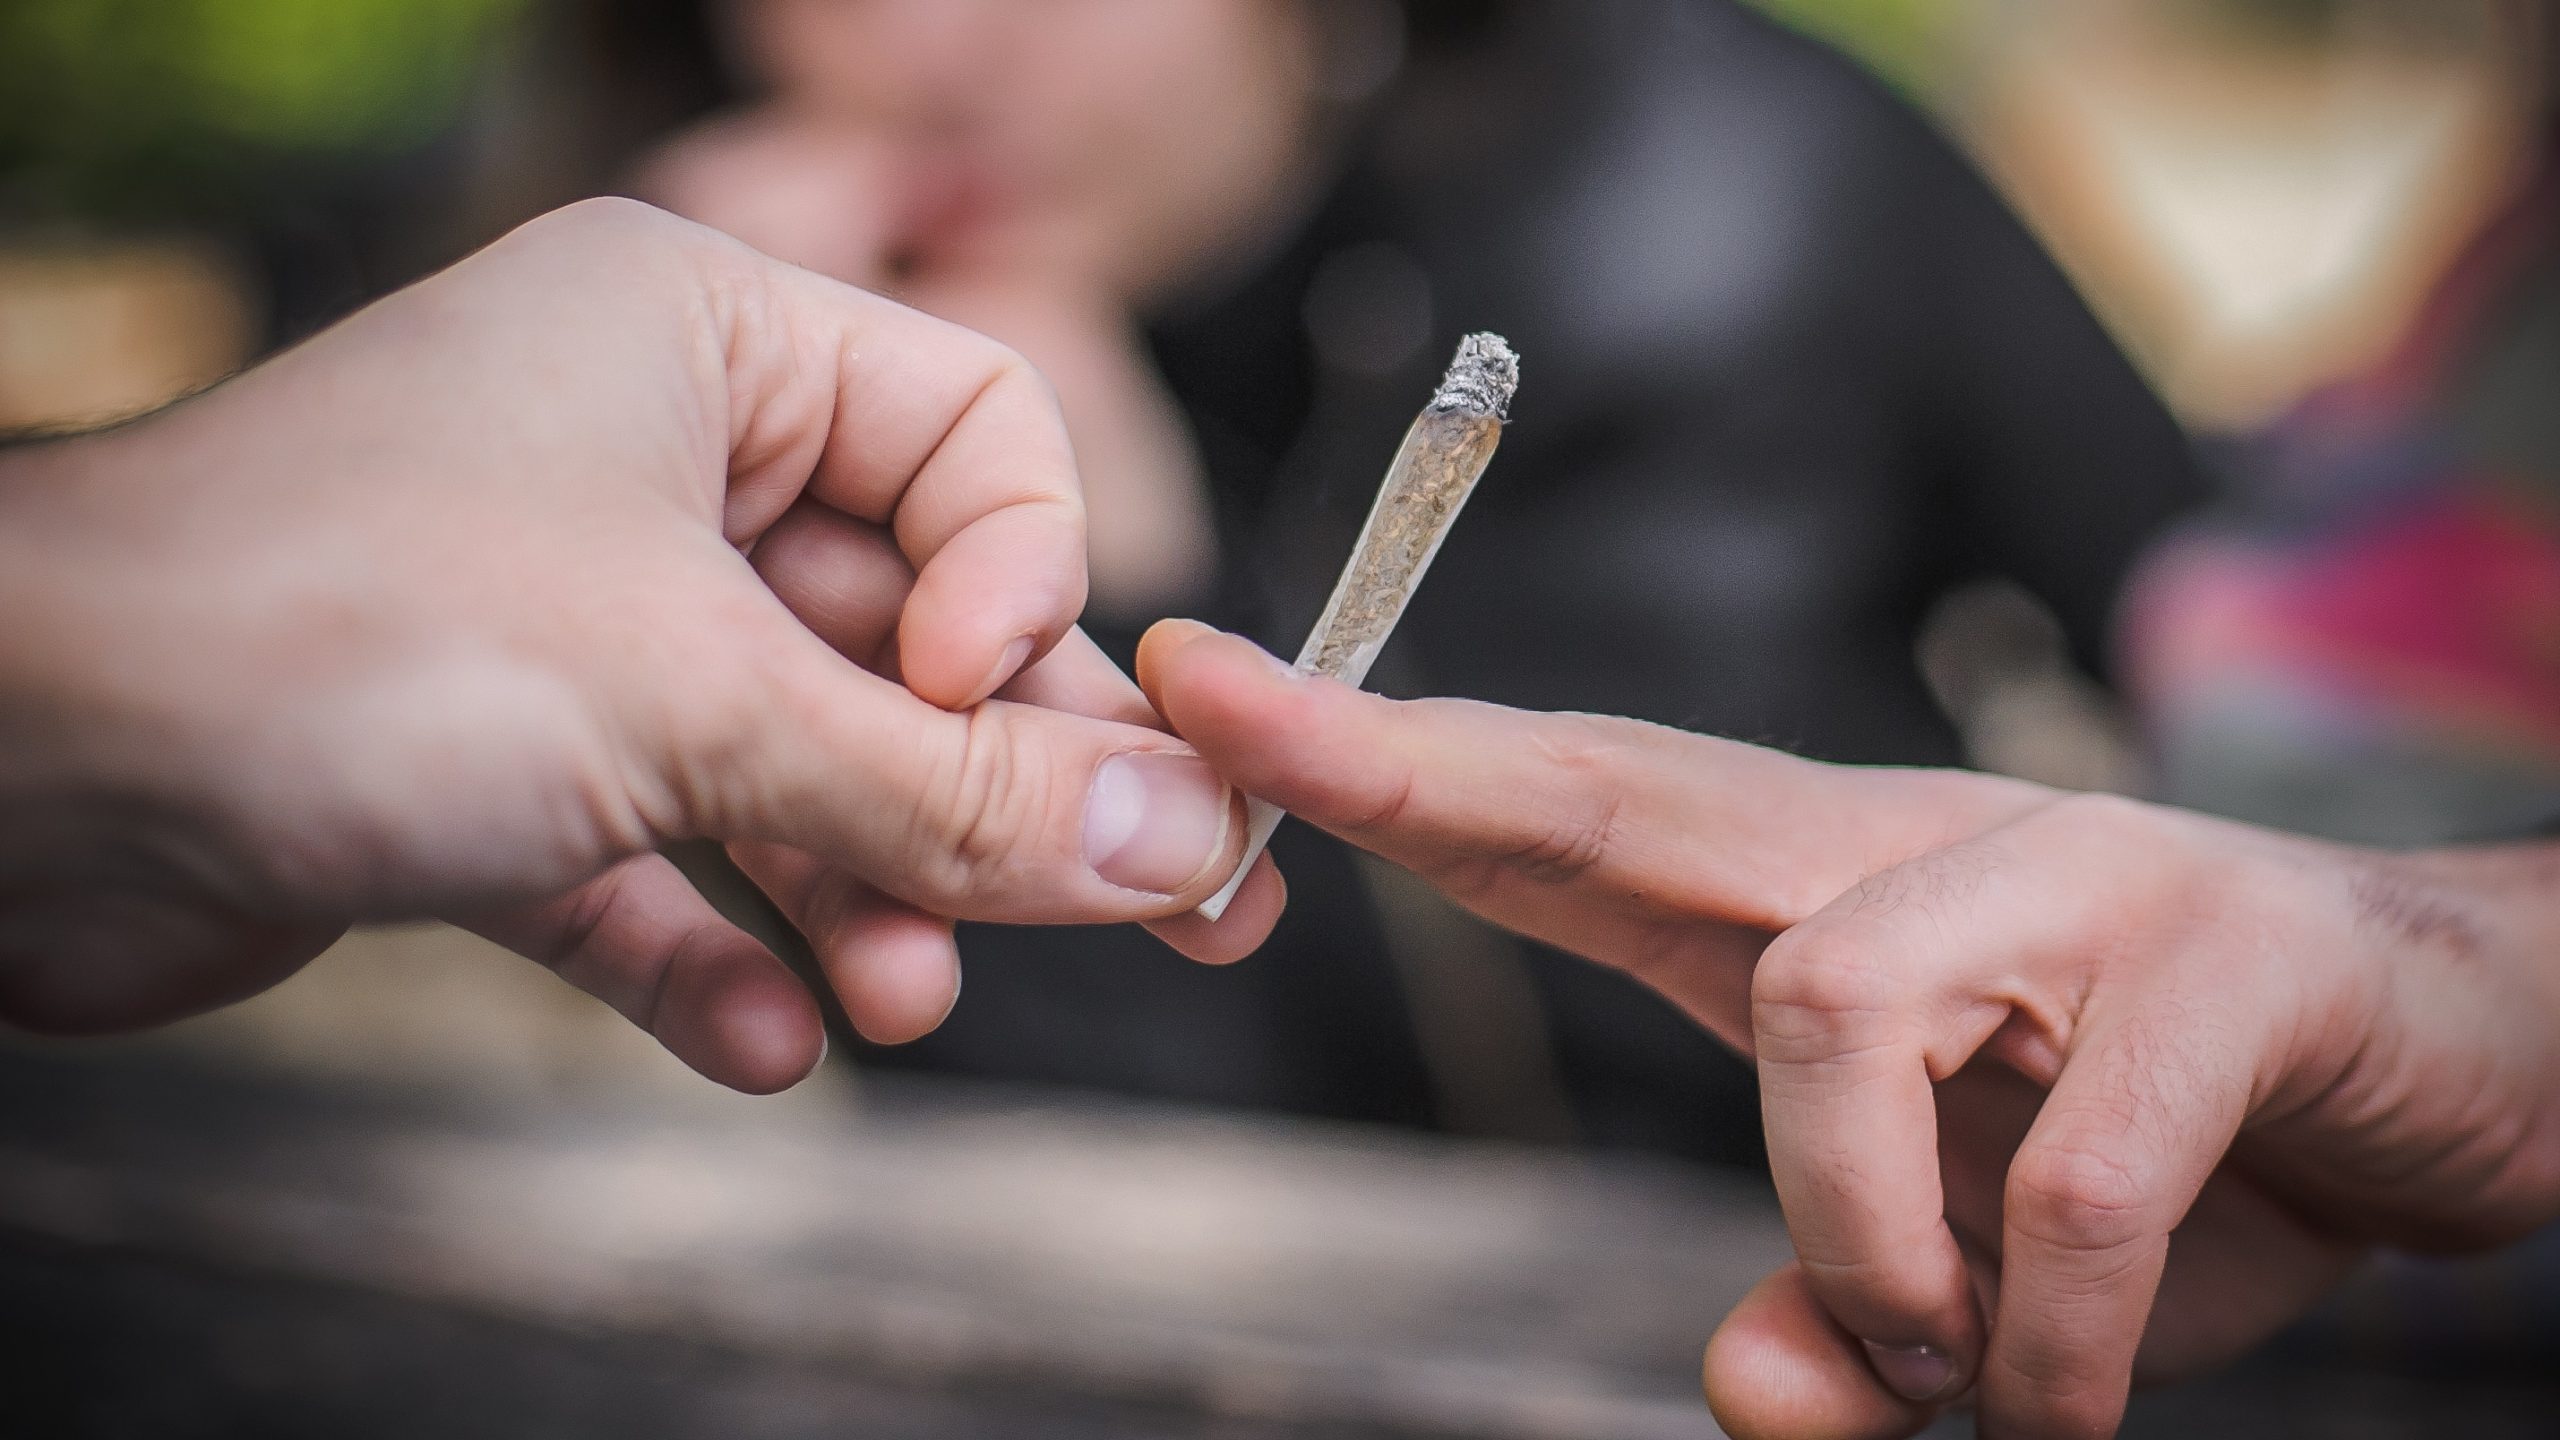 Study Shows 20% Increase in Frequency of Cannabis Consumption in Recreational States